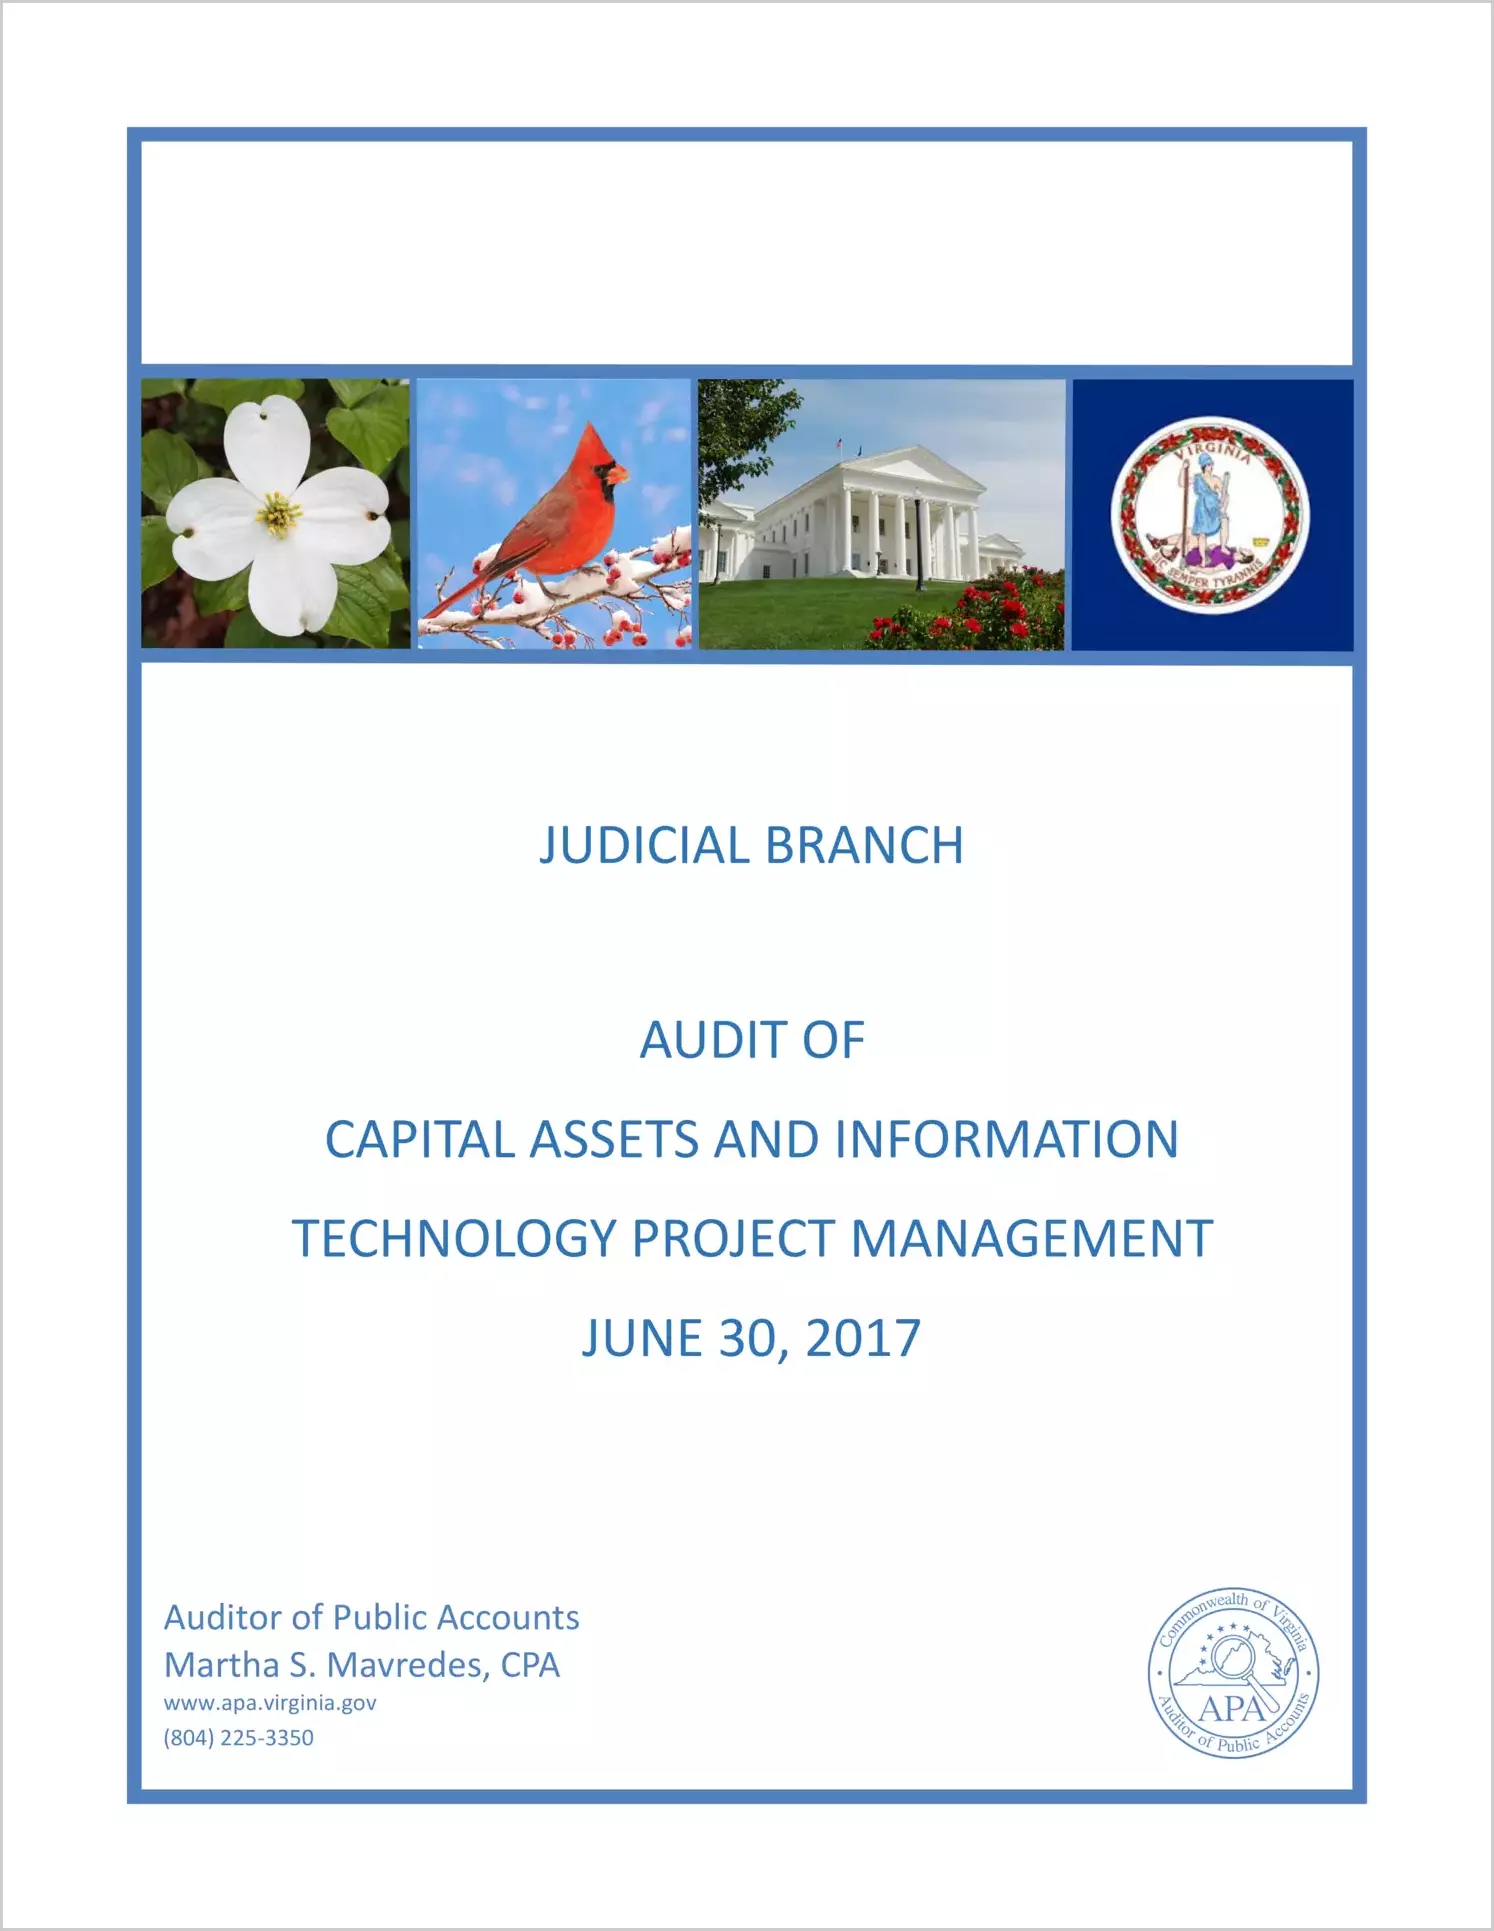 Judicial Branch audit of Capital Assets and Information Technology Project Management as of June 30, 2017